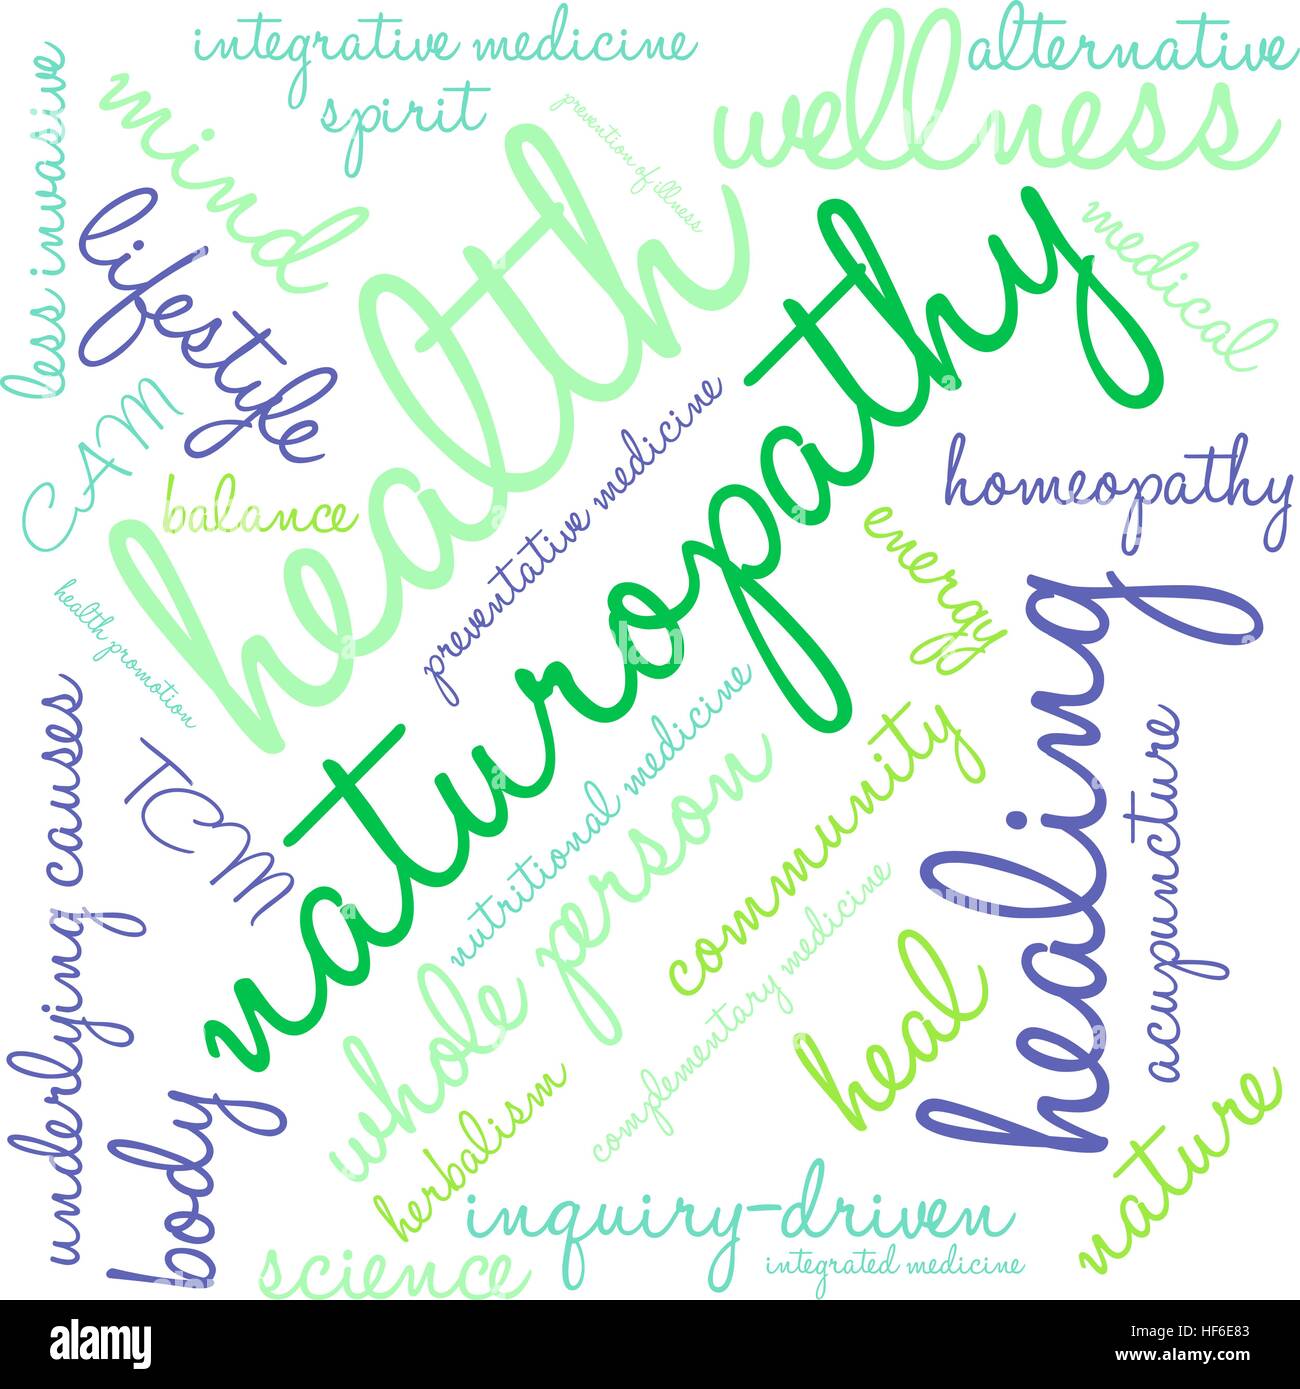 Naturopathy word cloud on a white background. Stock Vector